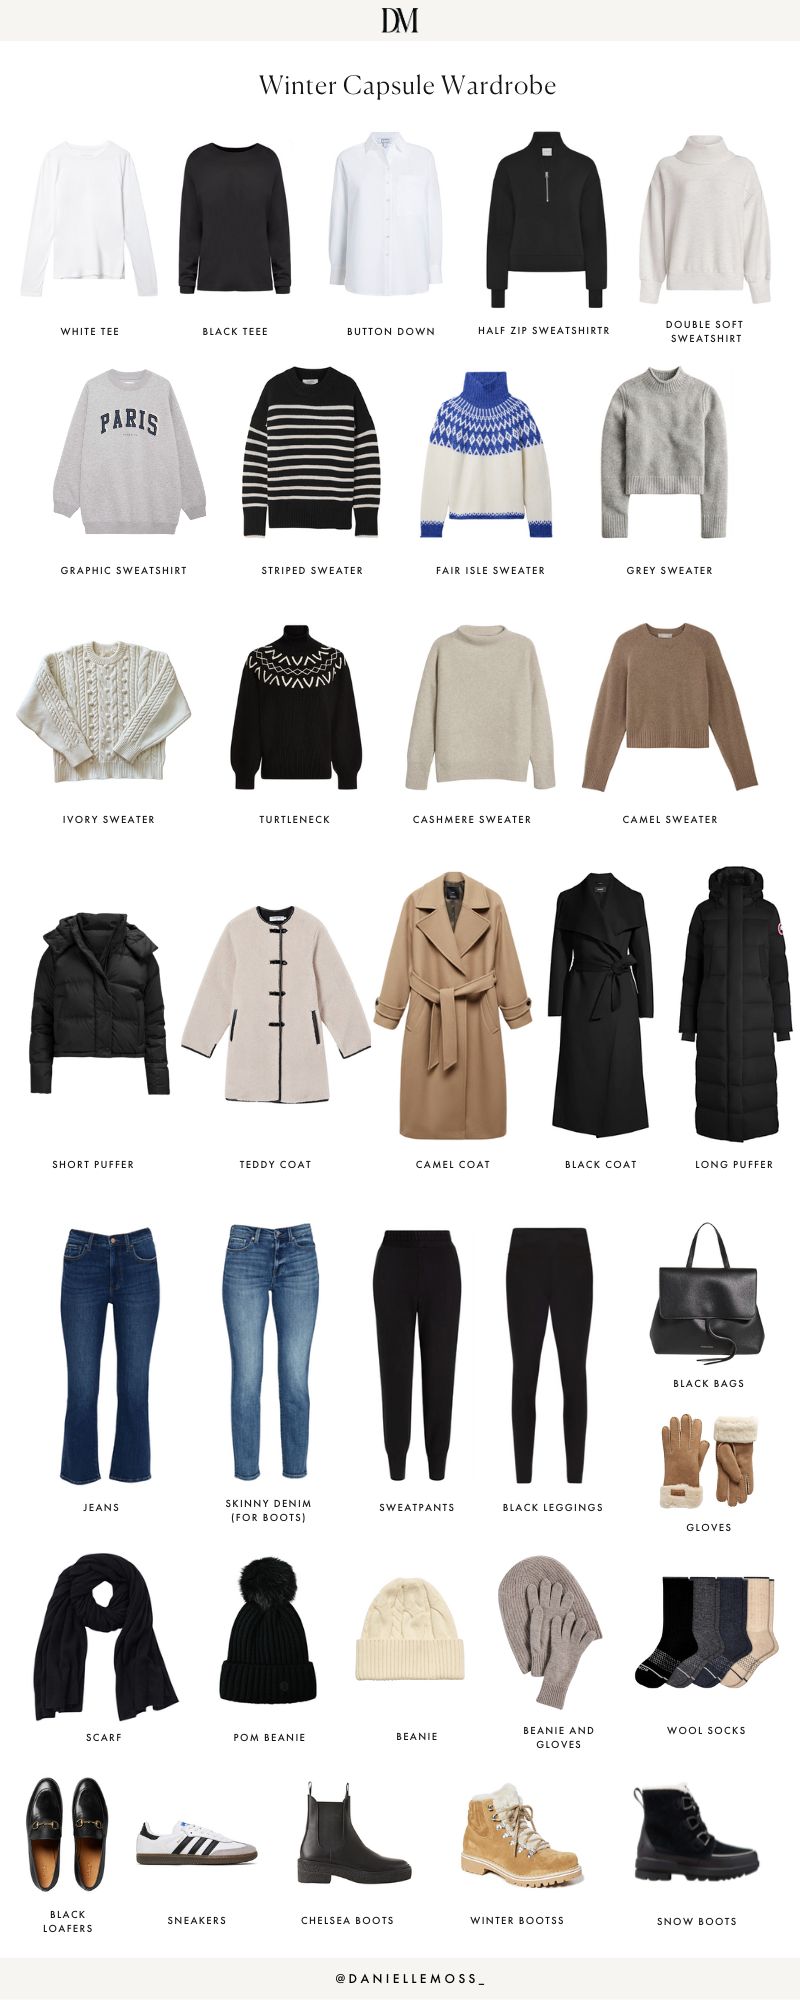 Winter Capsule Wardrobe, Comfortable, Easy, Put Together